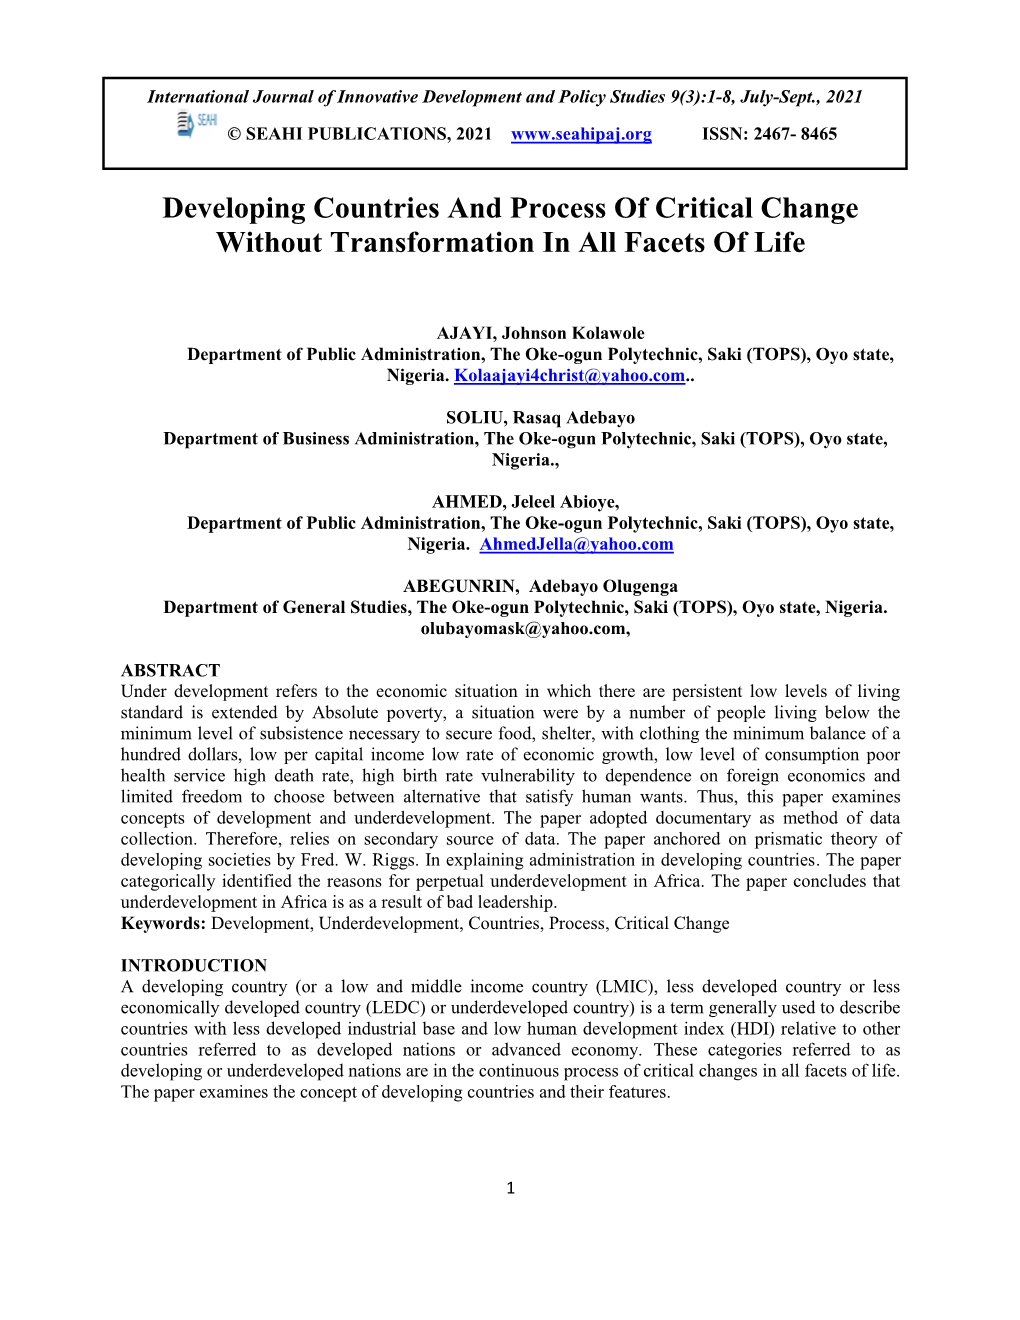 Developing Countries and Process of Critical Change Without Transformation in All Facets of Life